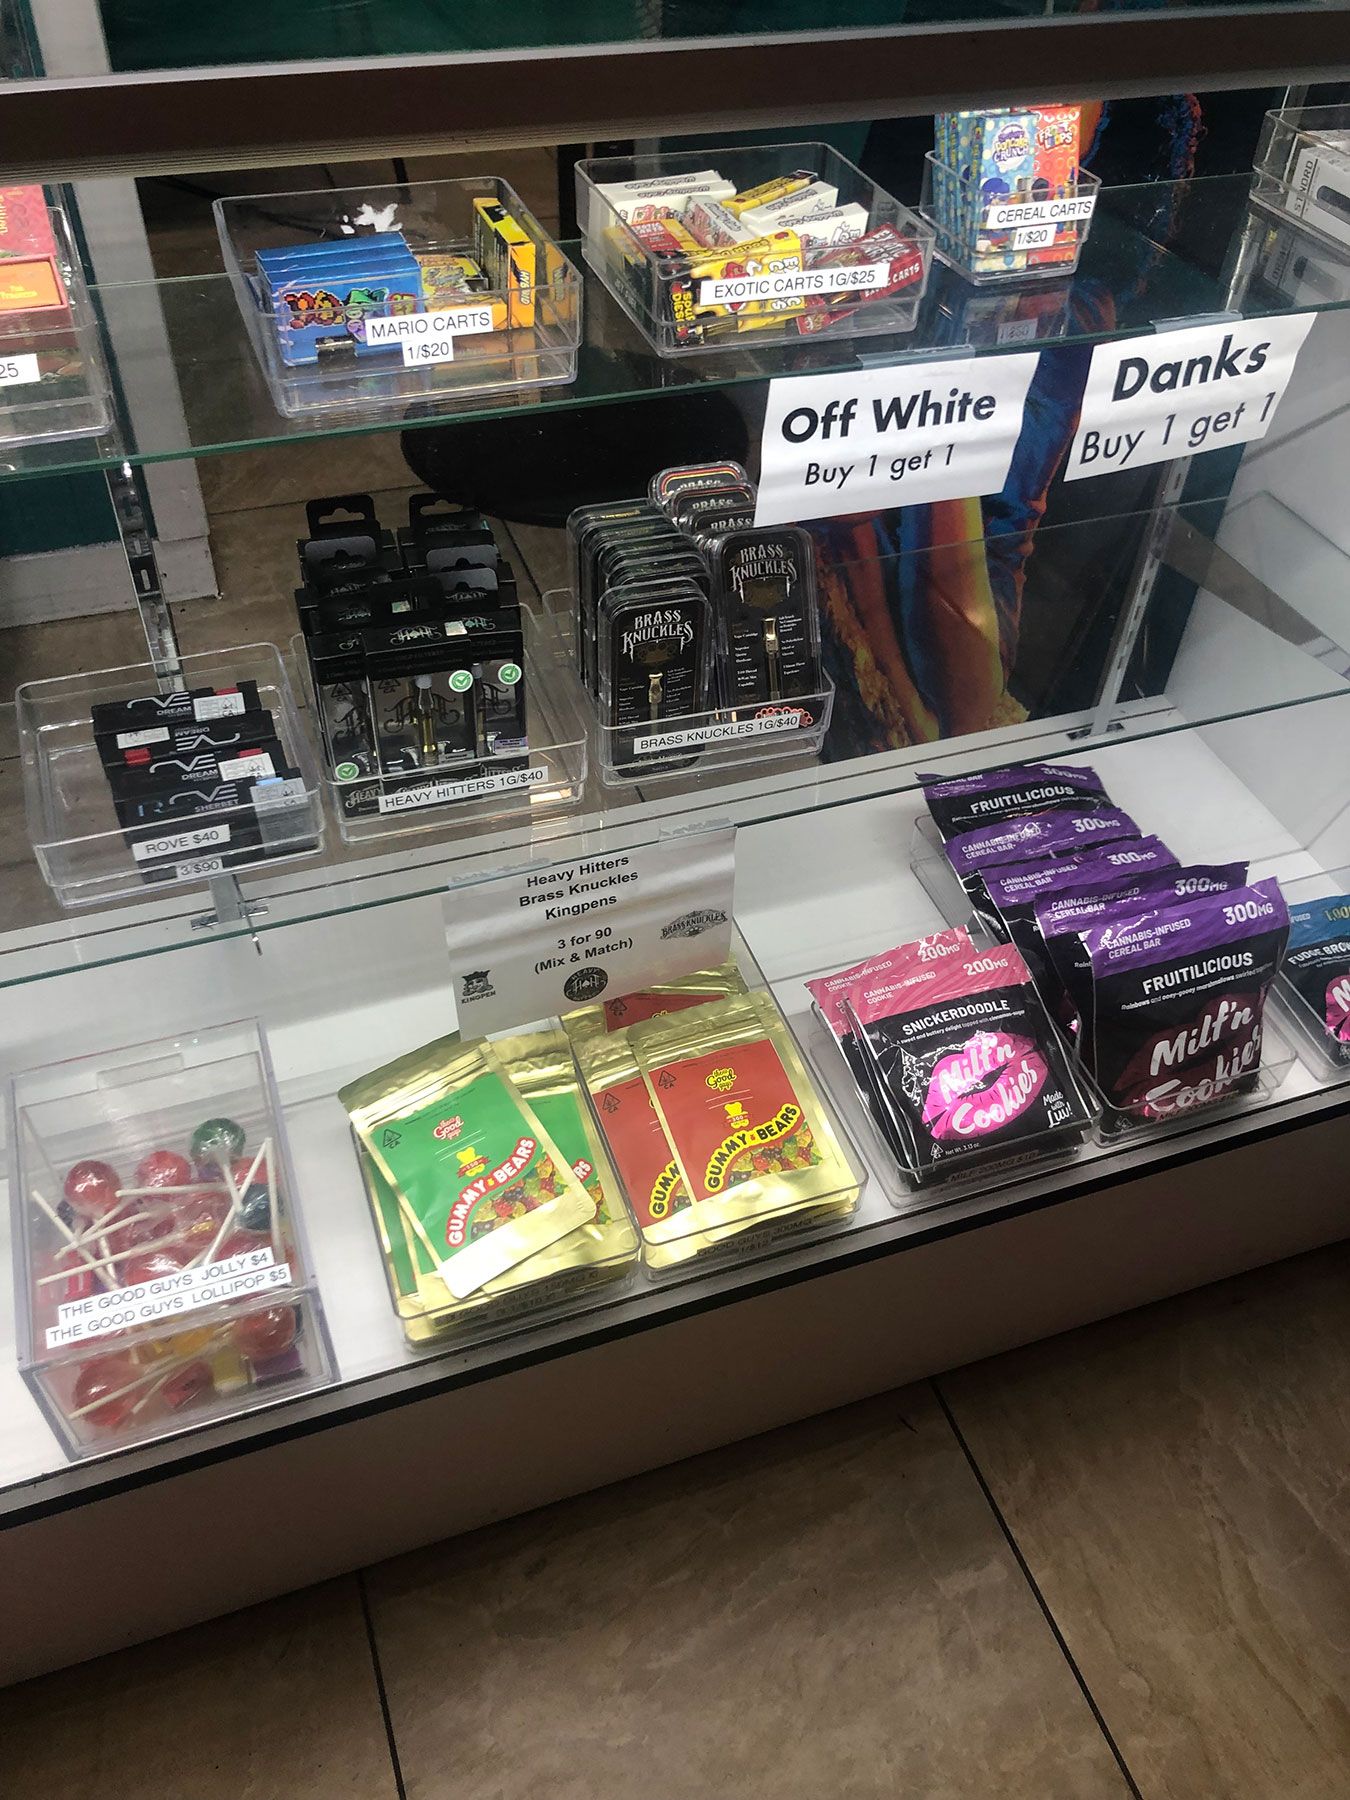 An unlicensed cannabis store in Los Angeles selling potentially toxic Dank Vapes vape cartridges two-for-one.